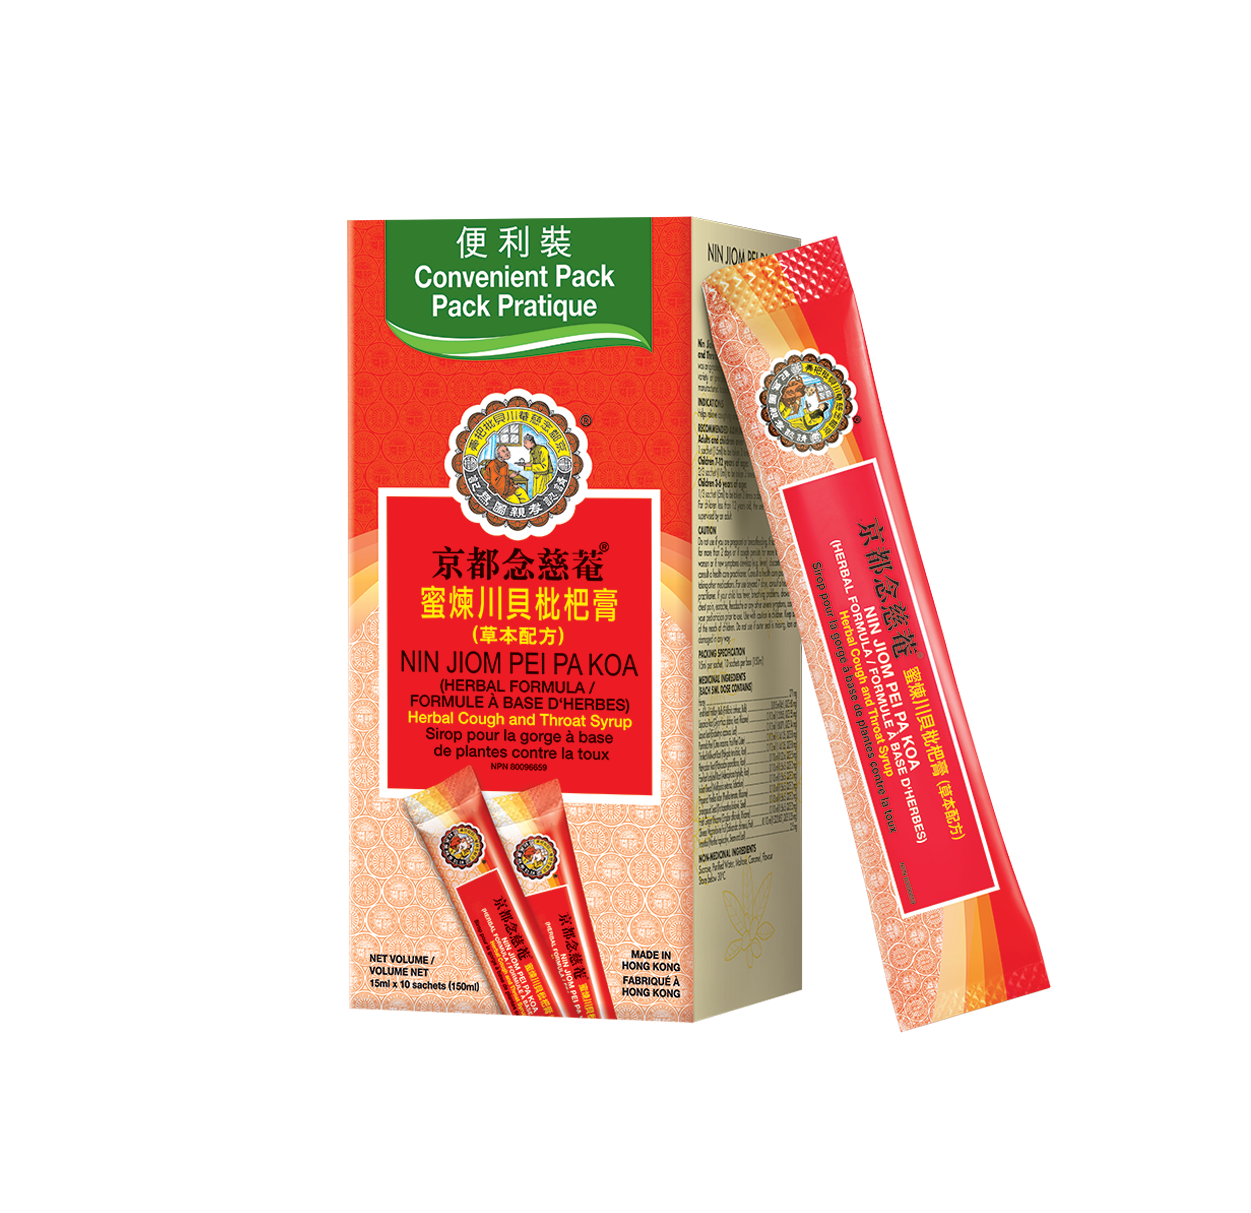 Nin Jiom Pei Pa Gao - Chinese Herbal Syrup for Dry Cough